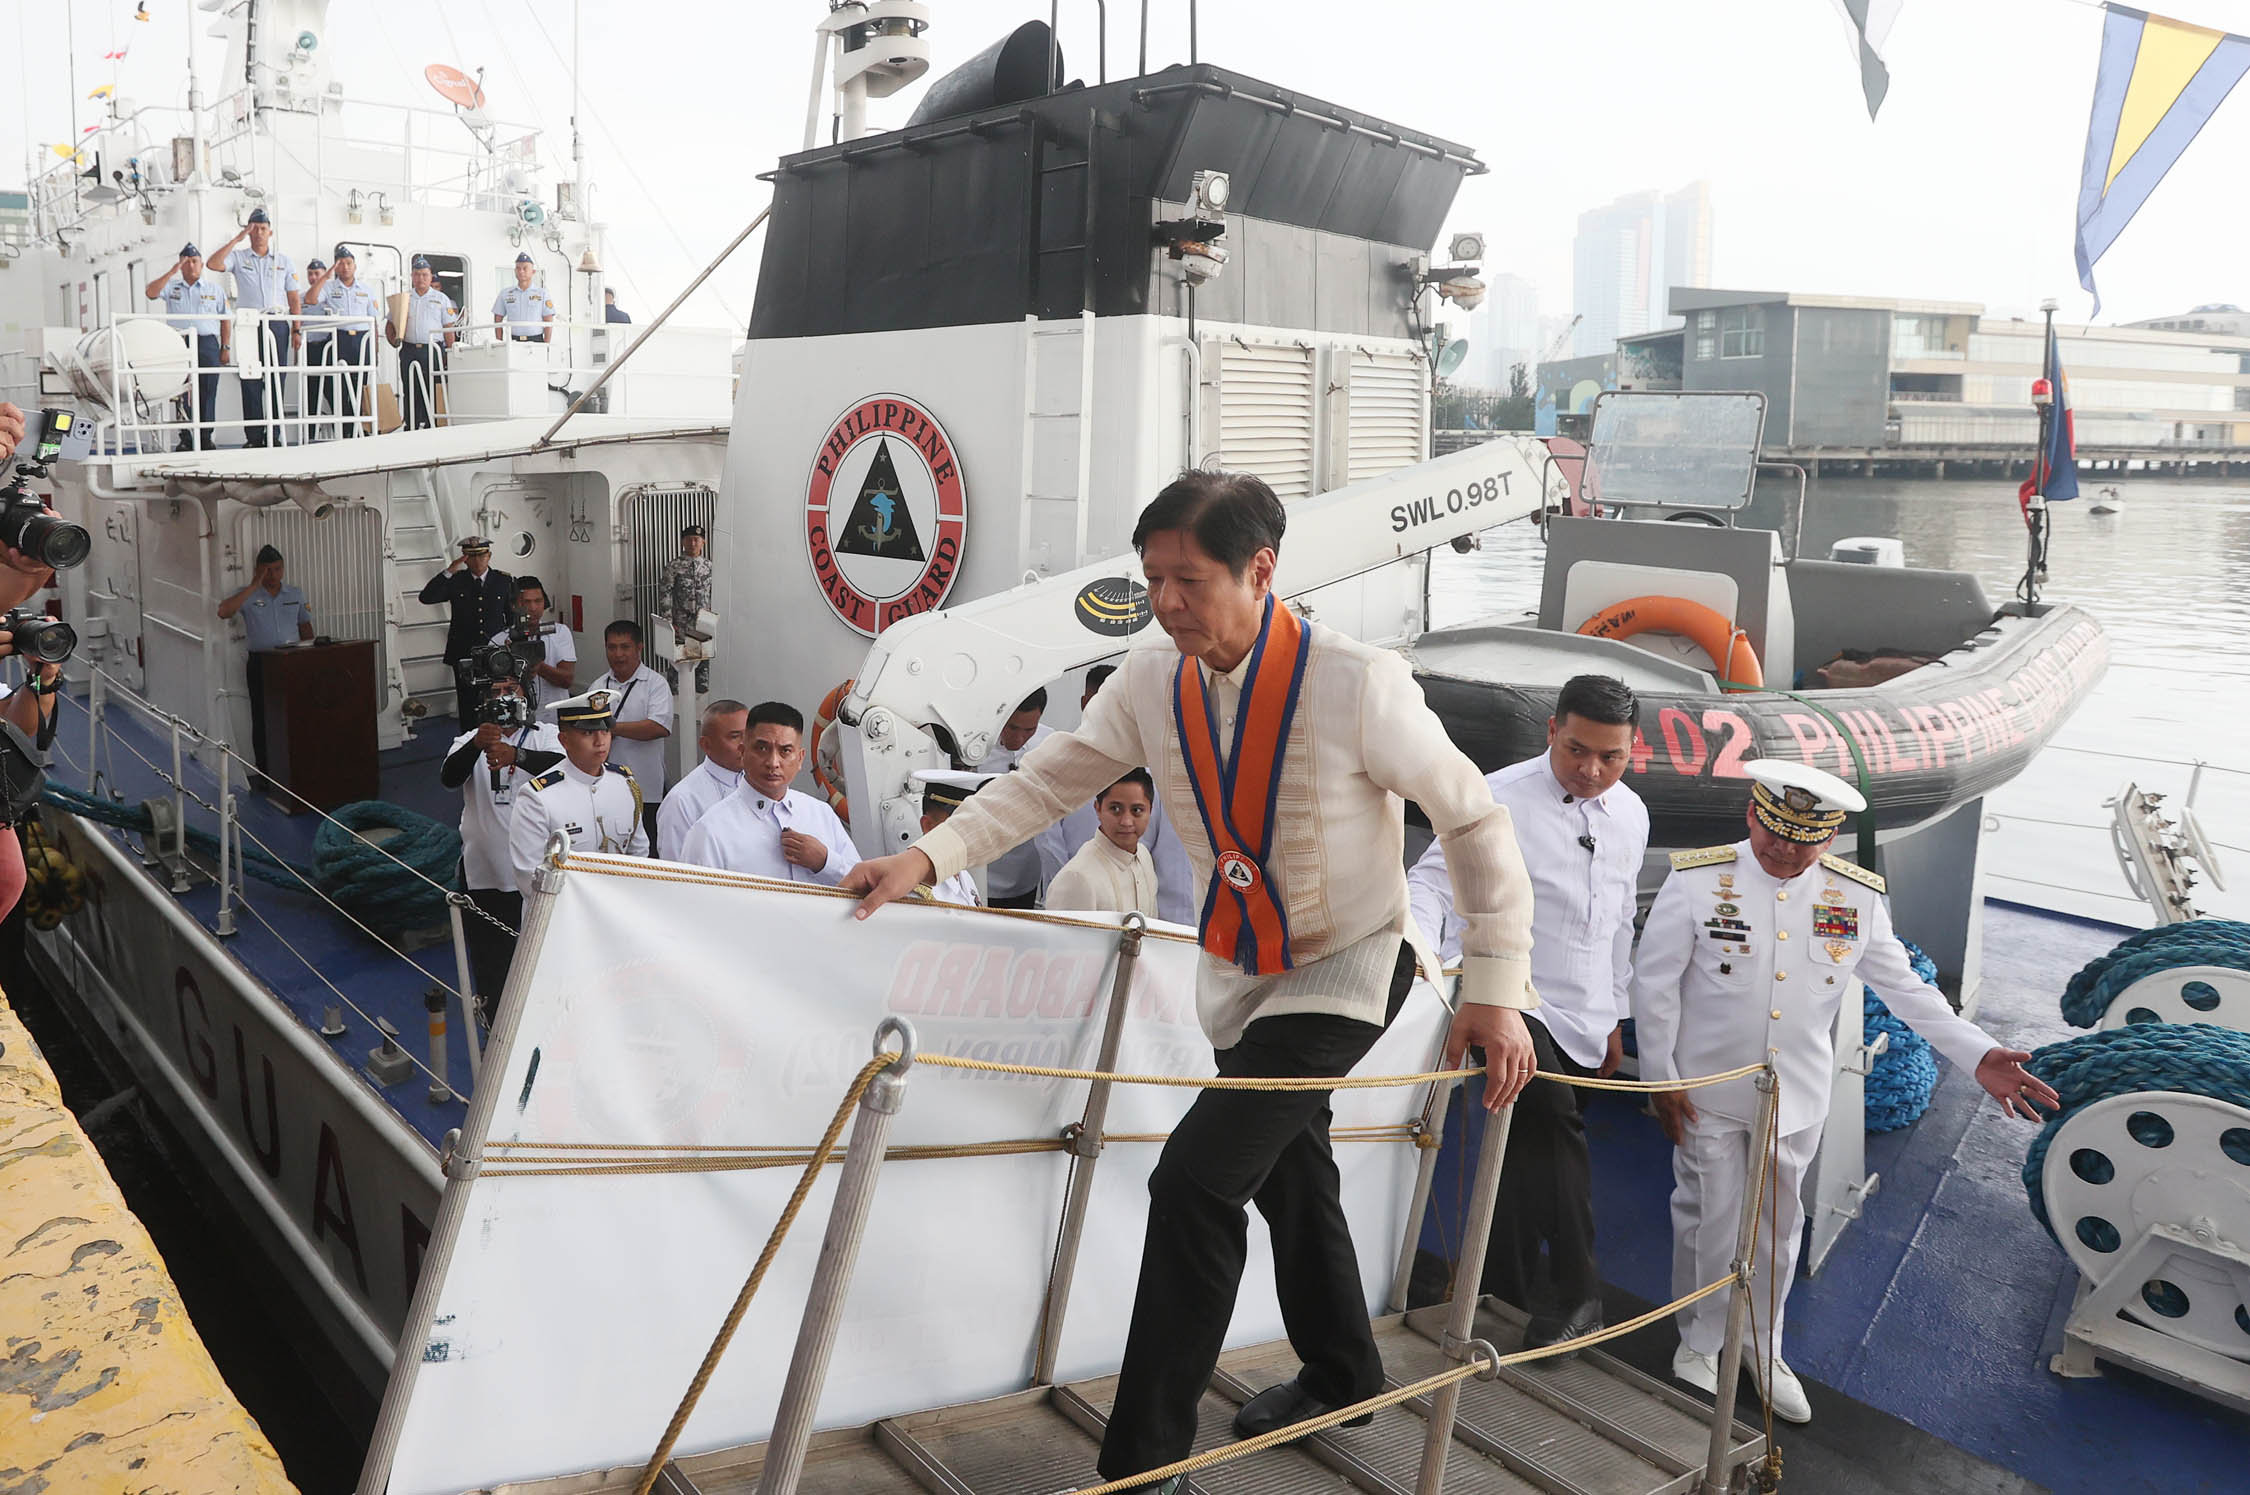 Coast Guard to get 40 new patrol boats | Inquirer News